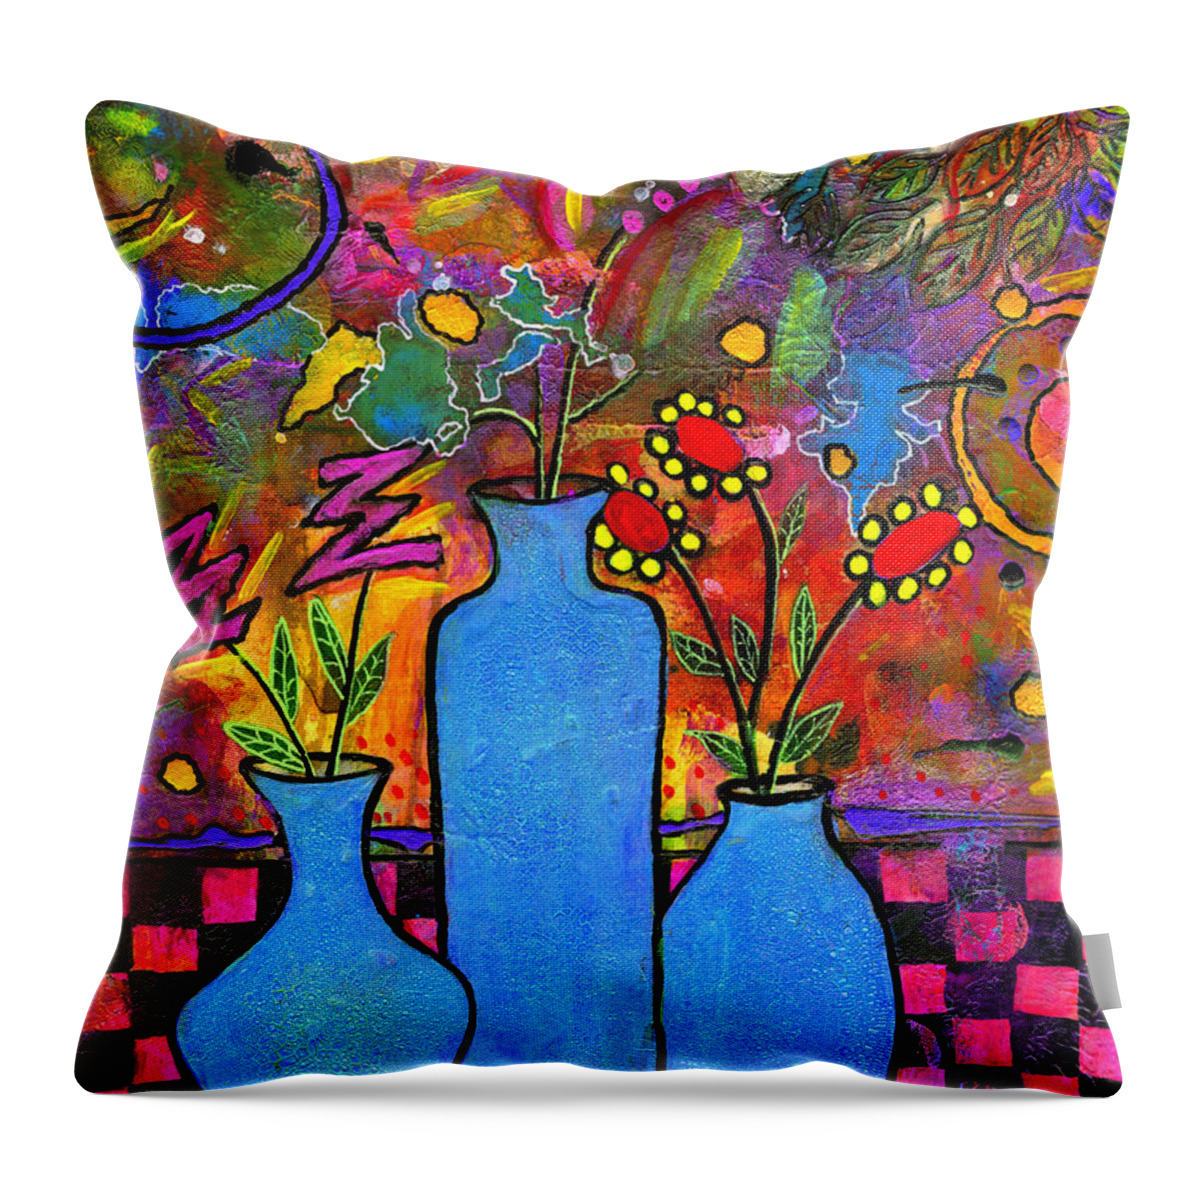 Acrylic Throw Pillow featuring the mixed media An Abstract Still Life by Angela L Walker